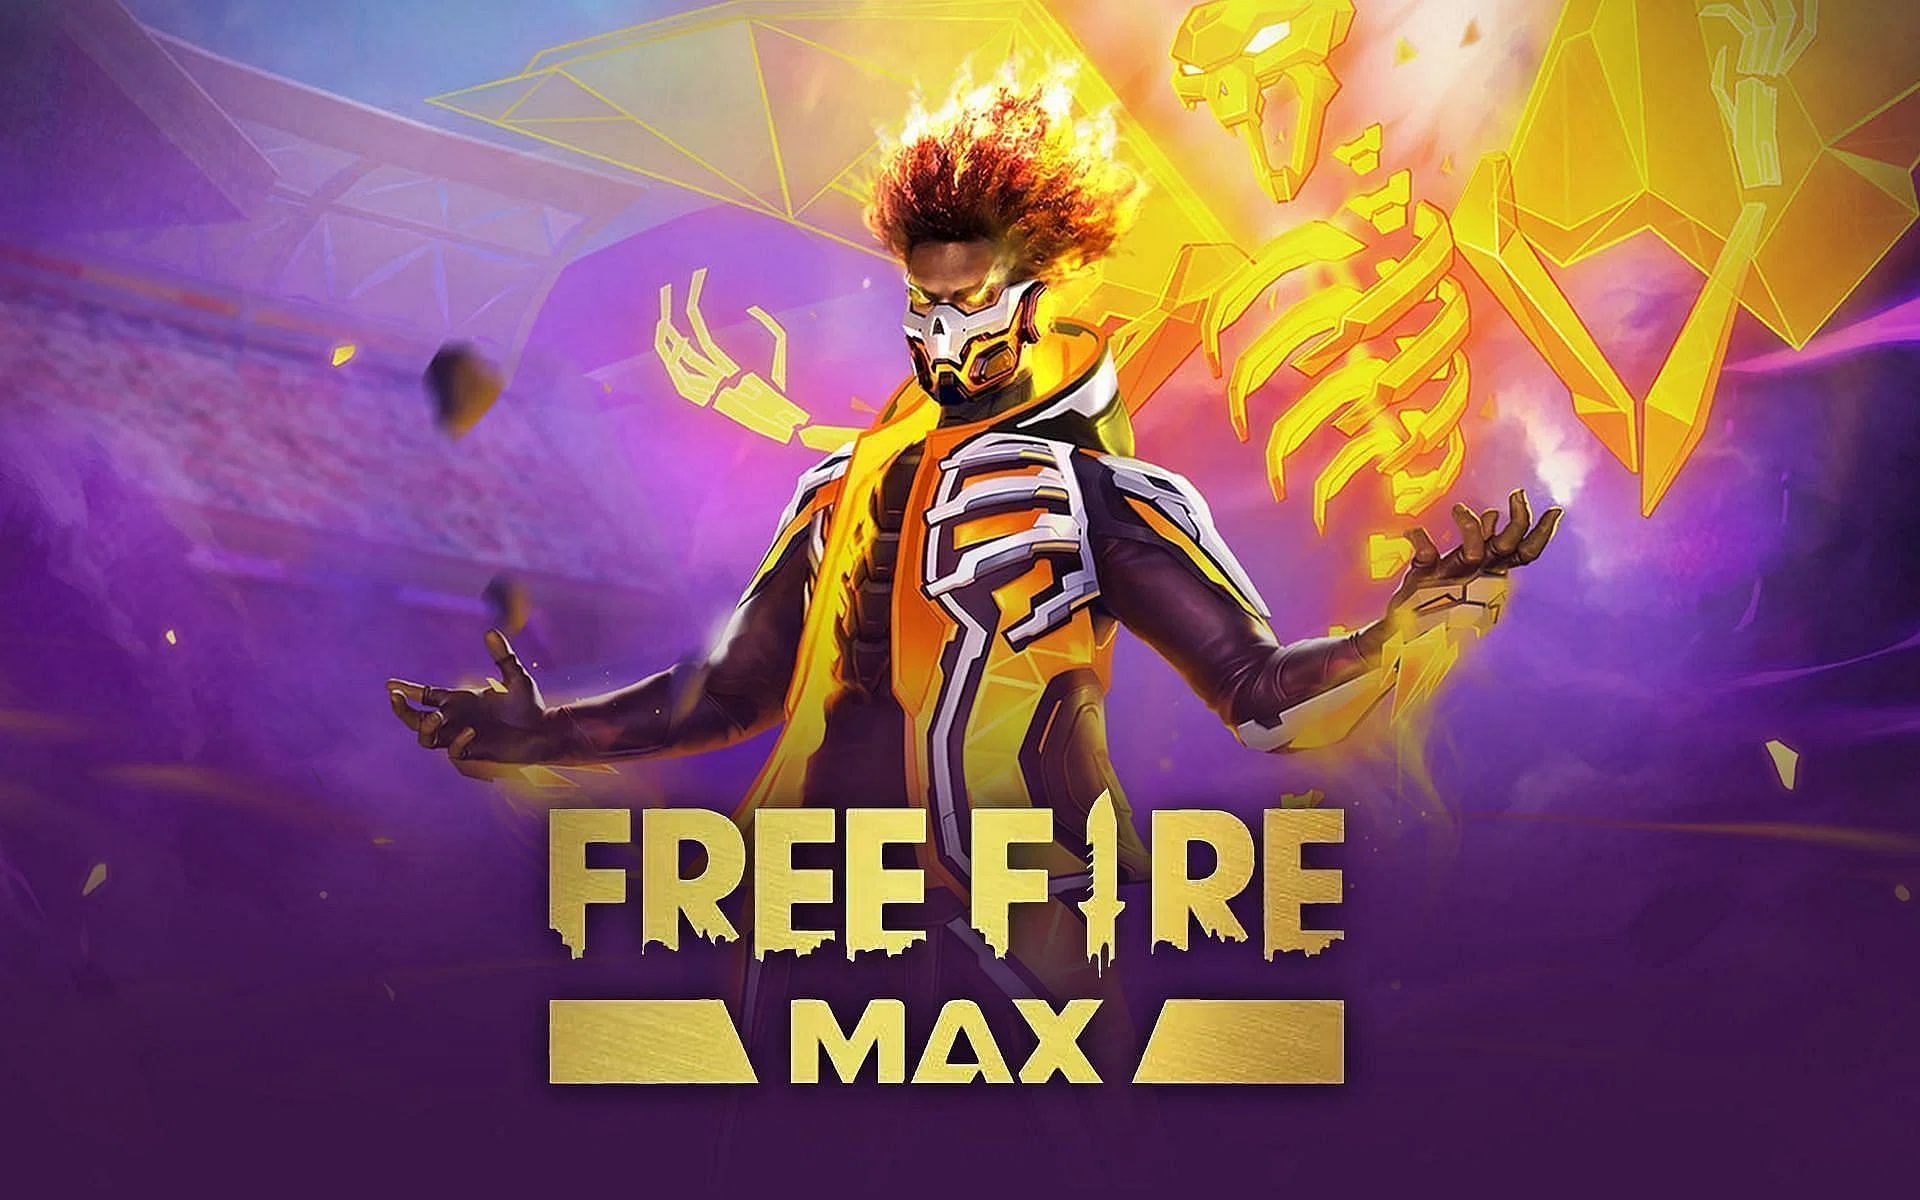 How To Play Free Fire and Free Fire Max In PC In 2022 